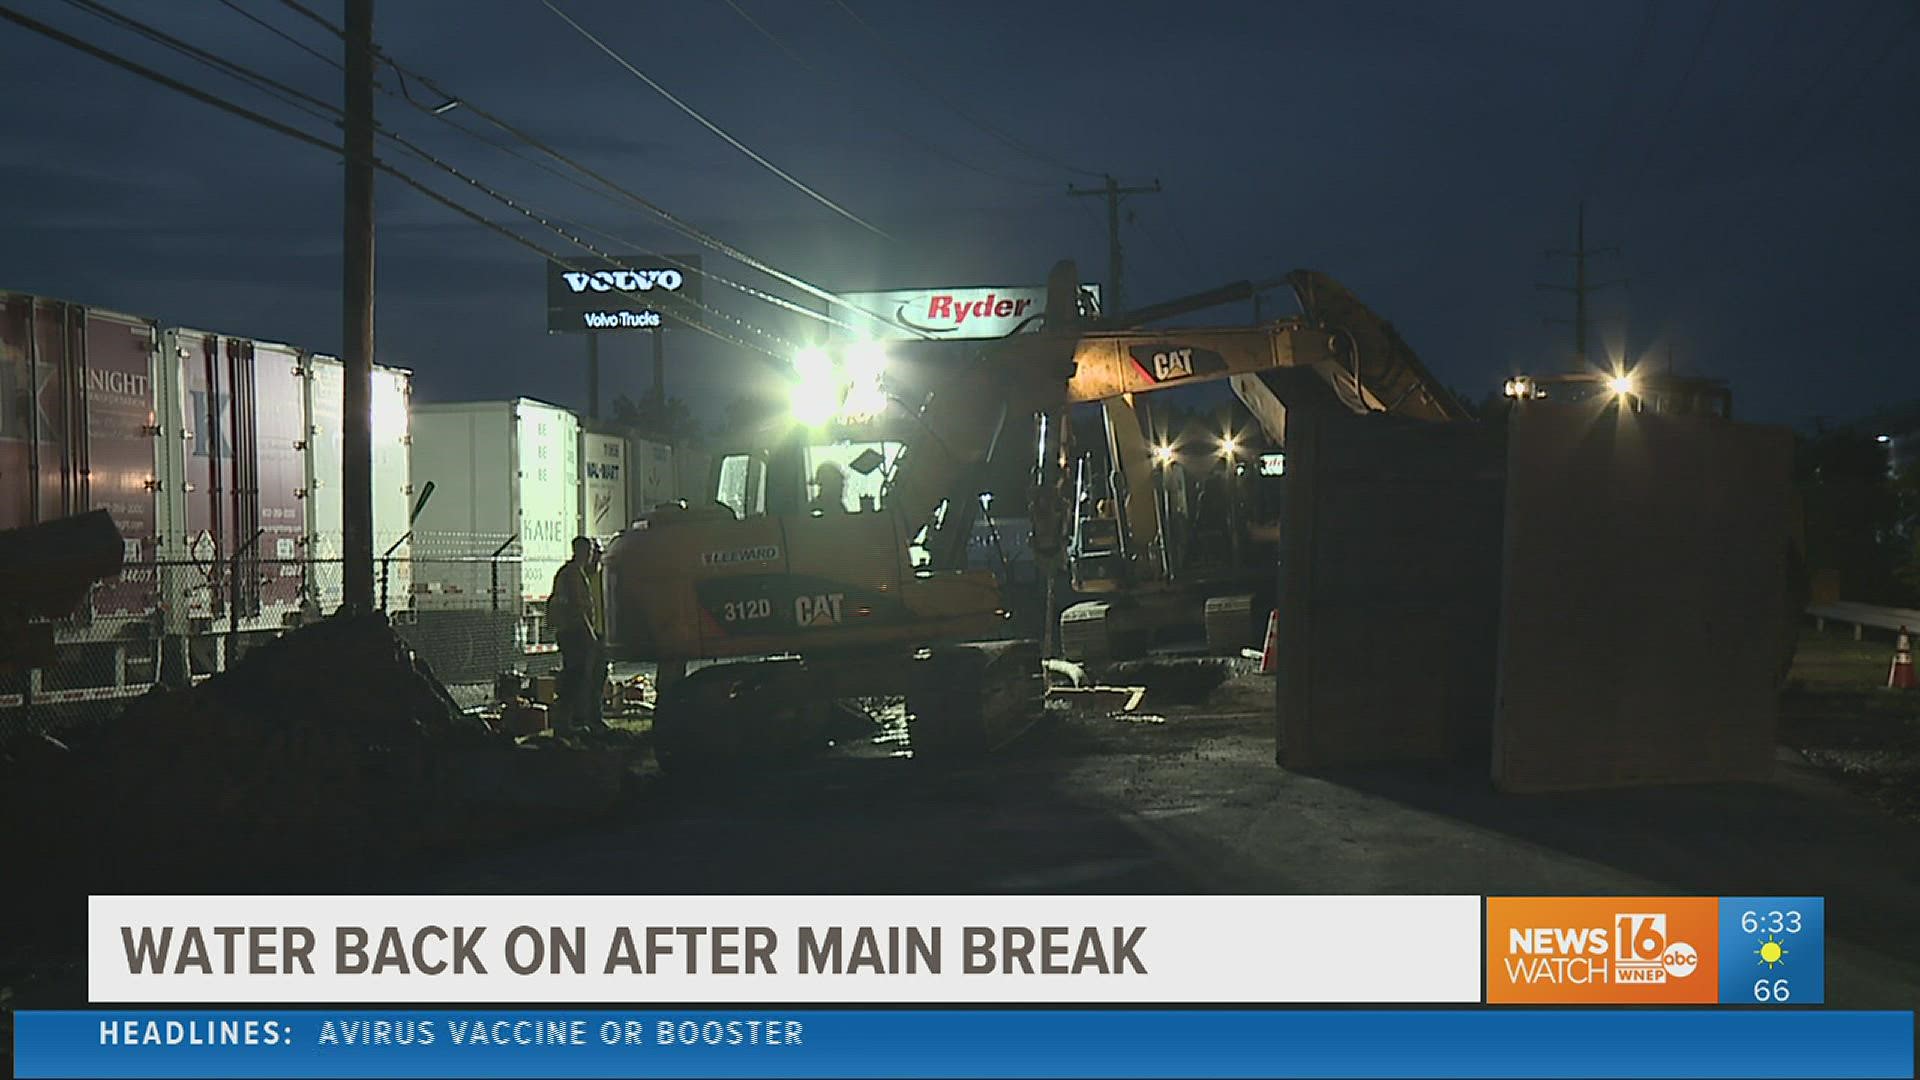 According to Pennsylvania American Water, repairs on the broken water main in Lackawanna County were completed overnight, and service is getting restored.